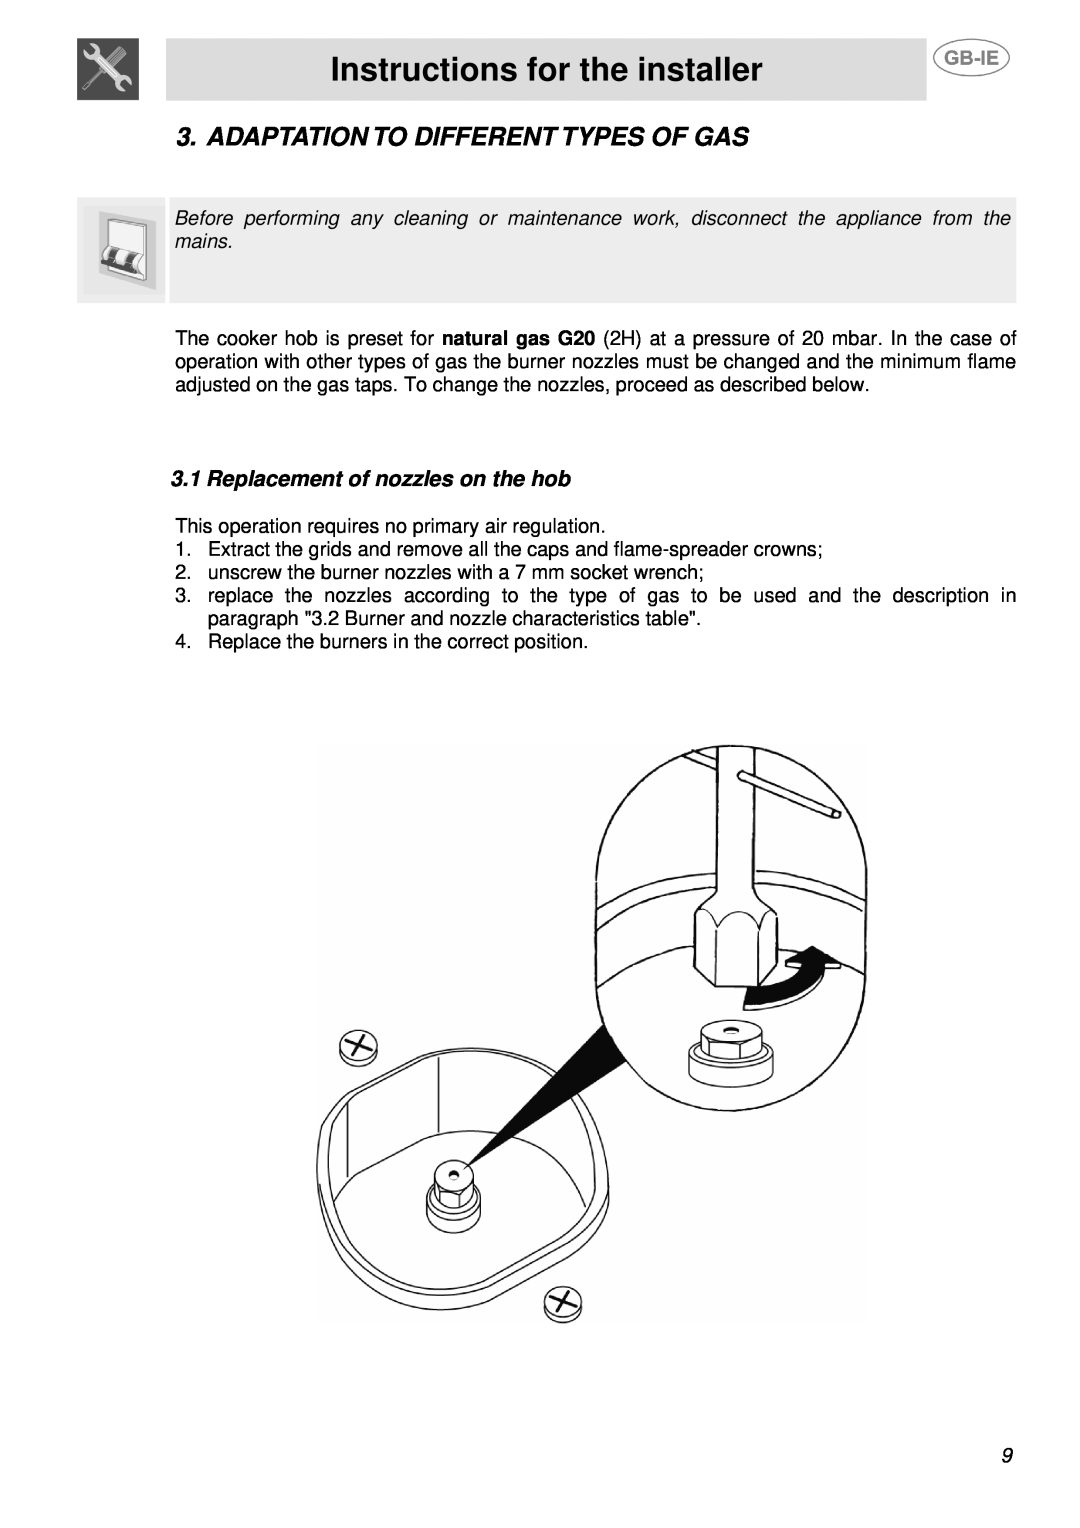 Smeg SSA91MFX Adaptation To Different Types Of Gas, Replacement of nozzles on the hob, Instructions for the installer 